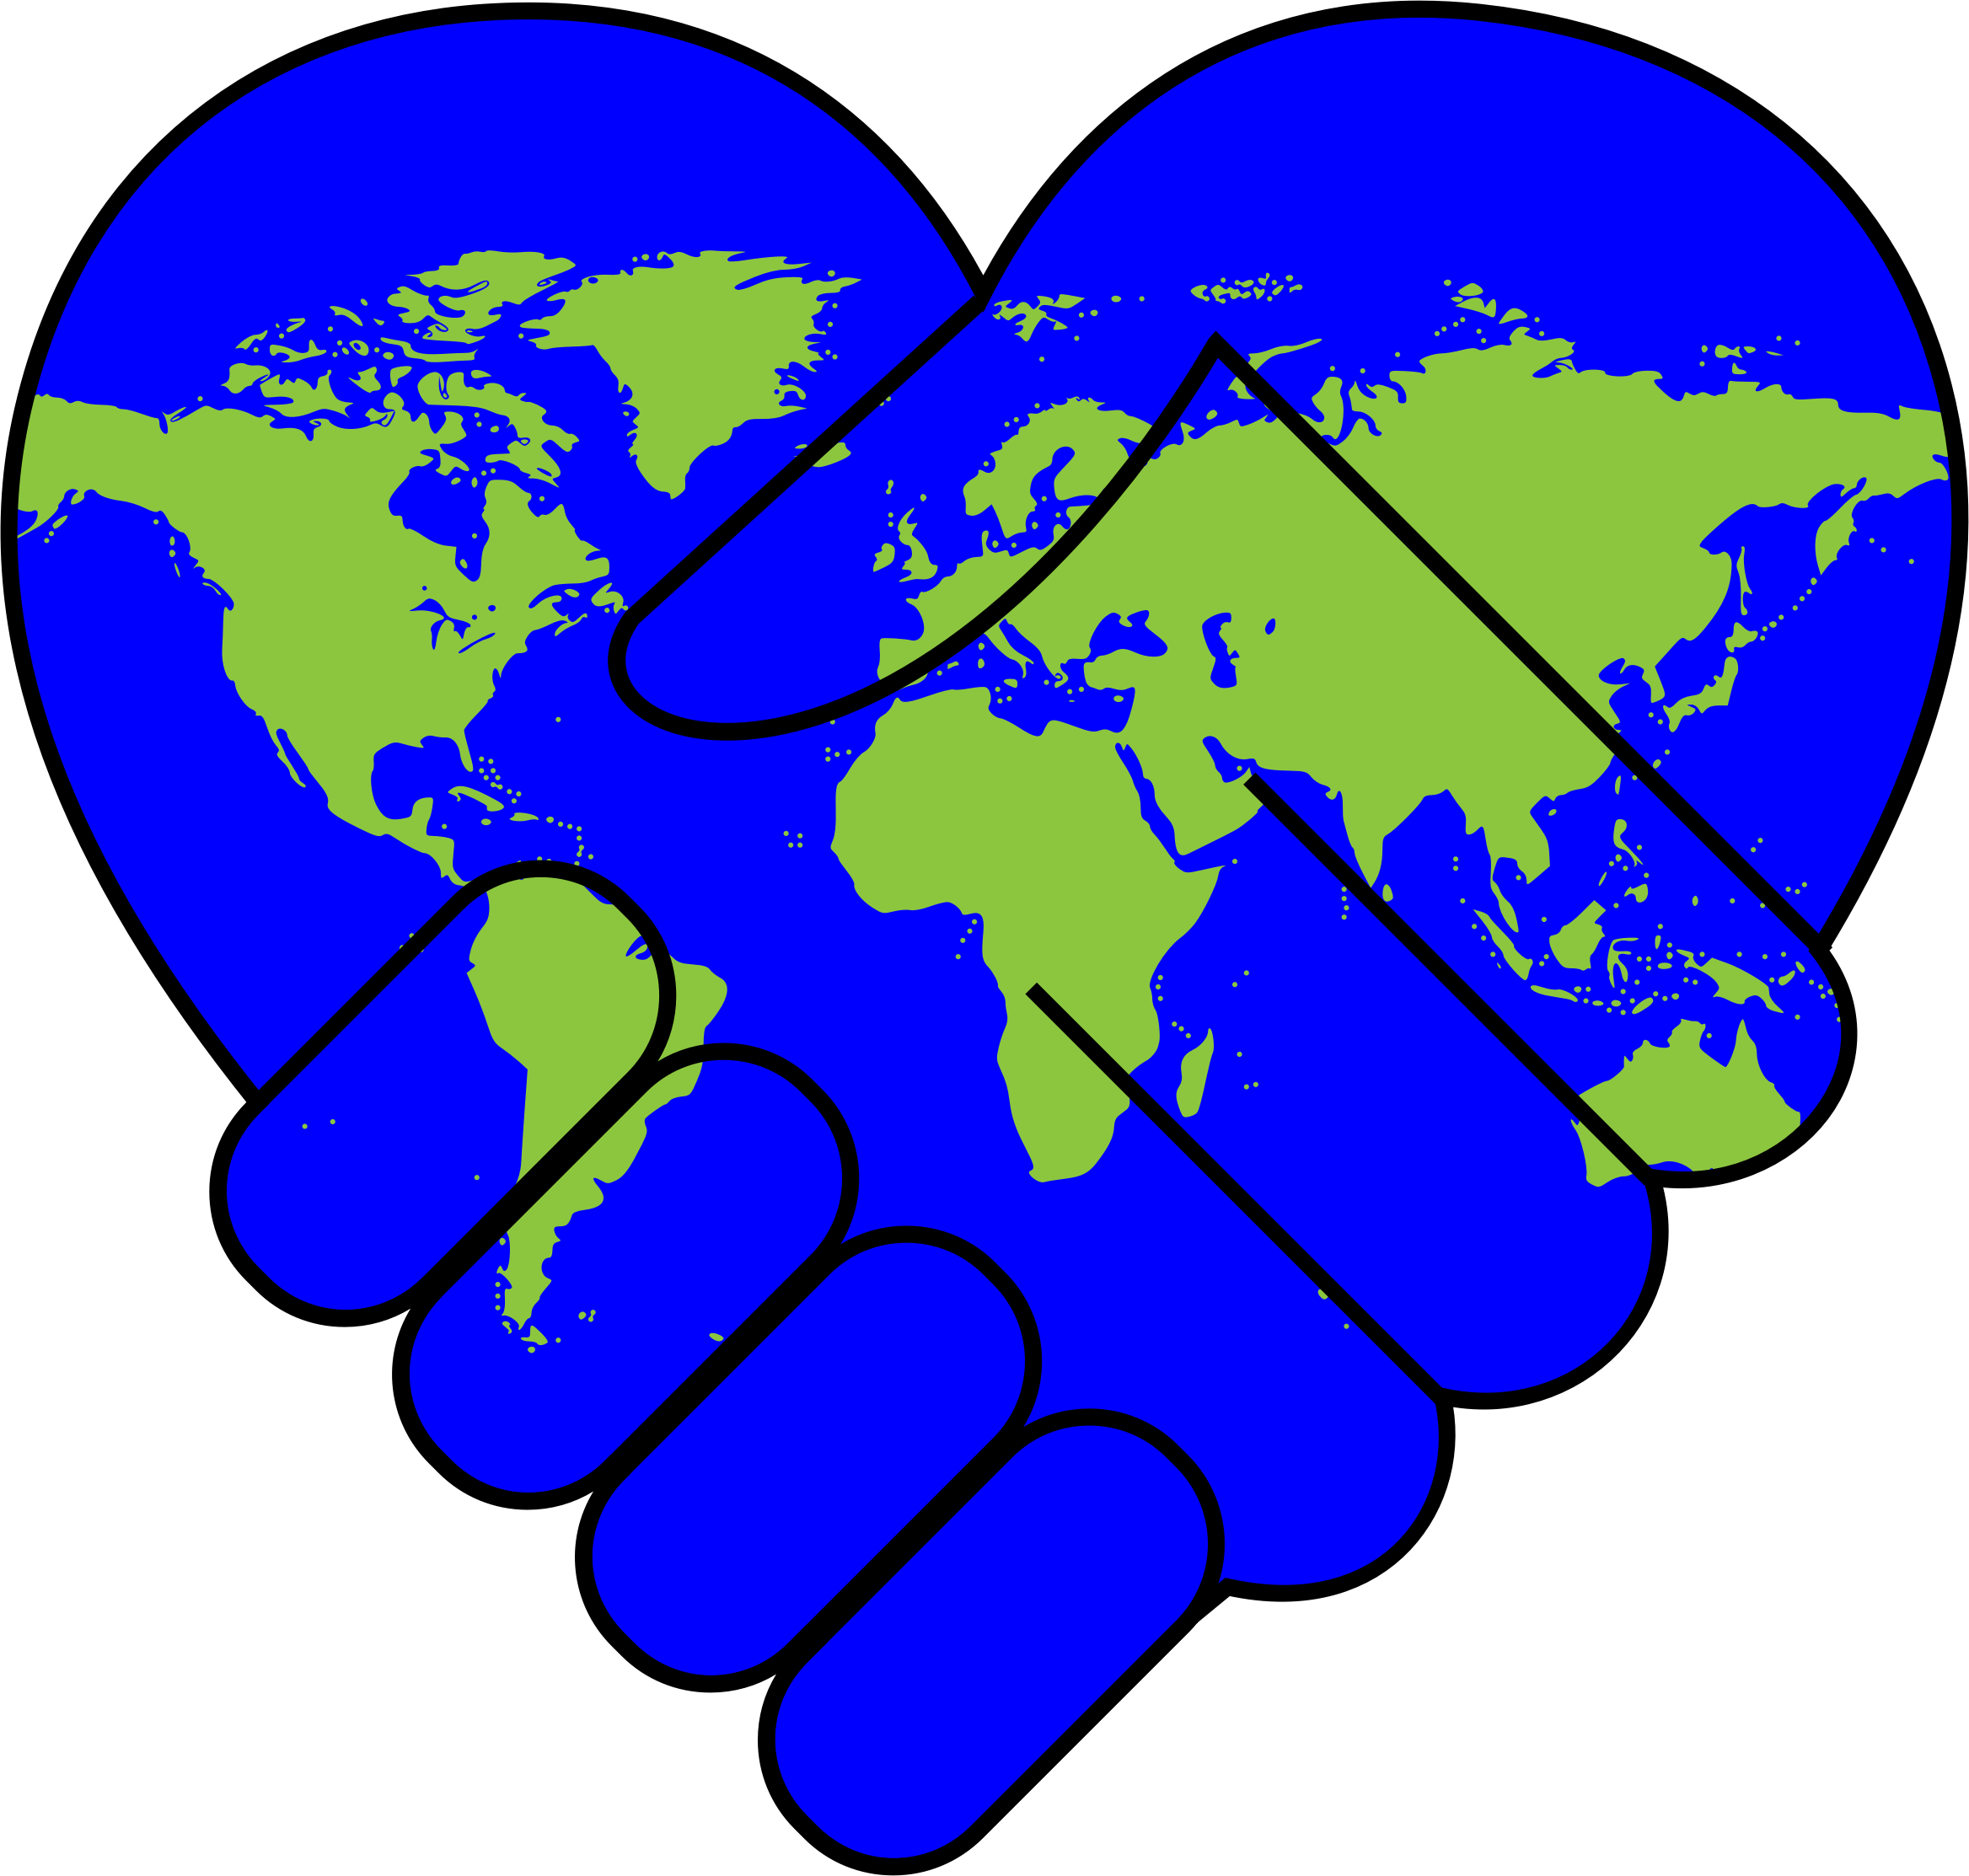 peace clipart united nations day